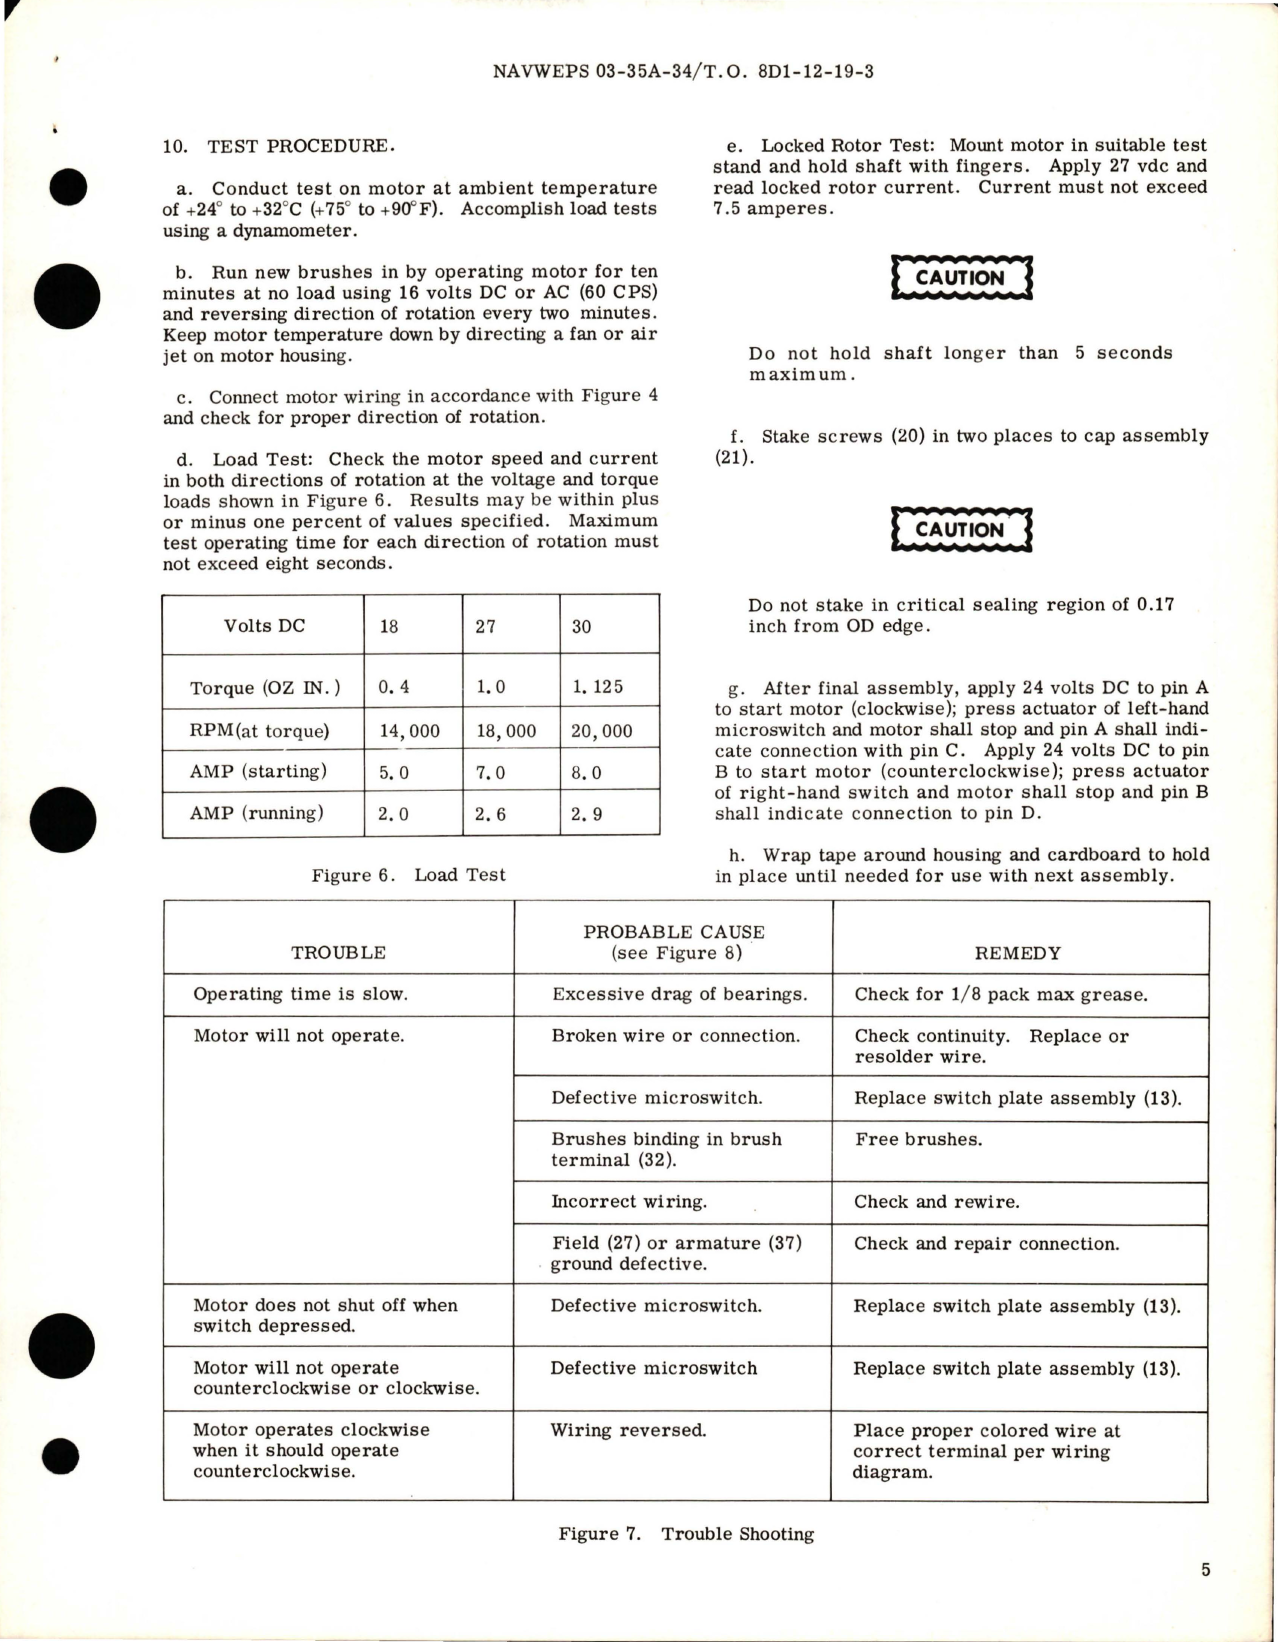 Sample page 5 from AirCorps Library document: Overhaul Instructions with Parts Breakdown for Actuator Housing & Motor Assemblies - Parts PW102654DE, PW102654HL, 102650E103, and 102650L10